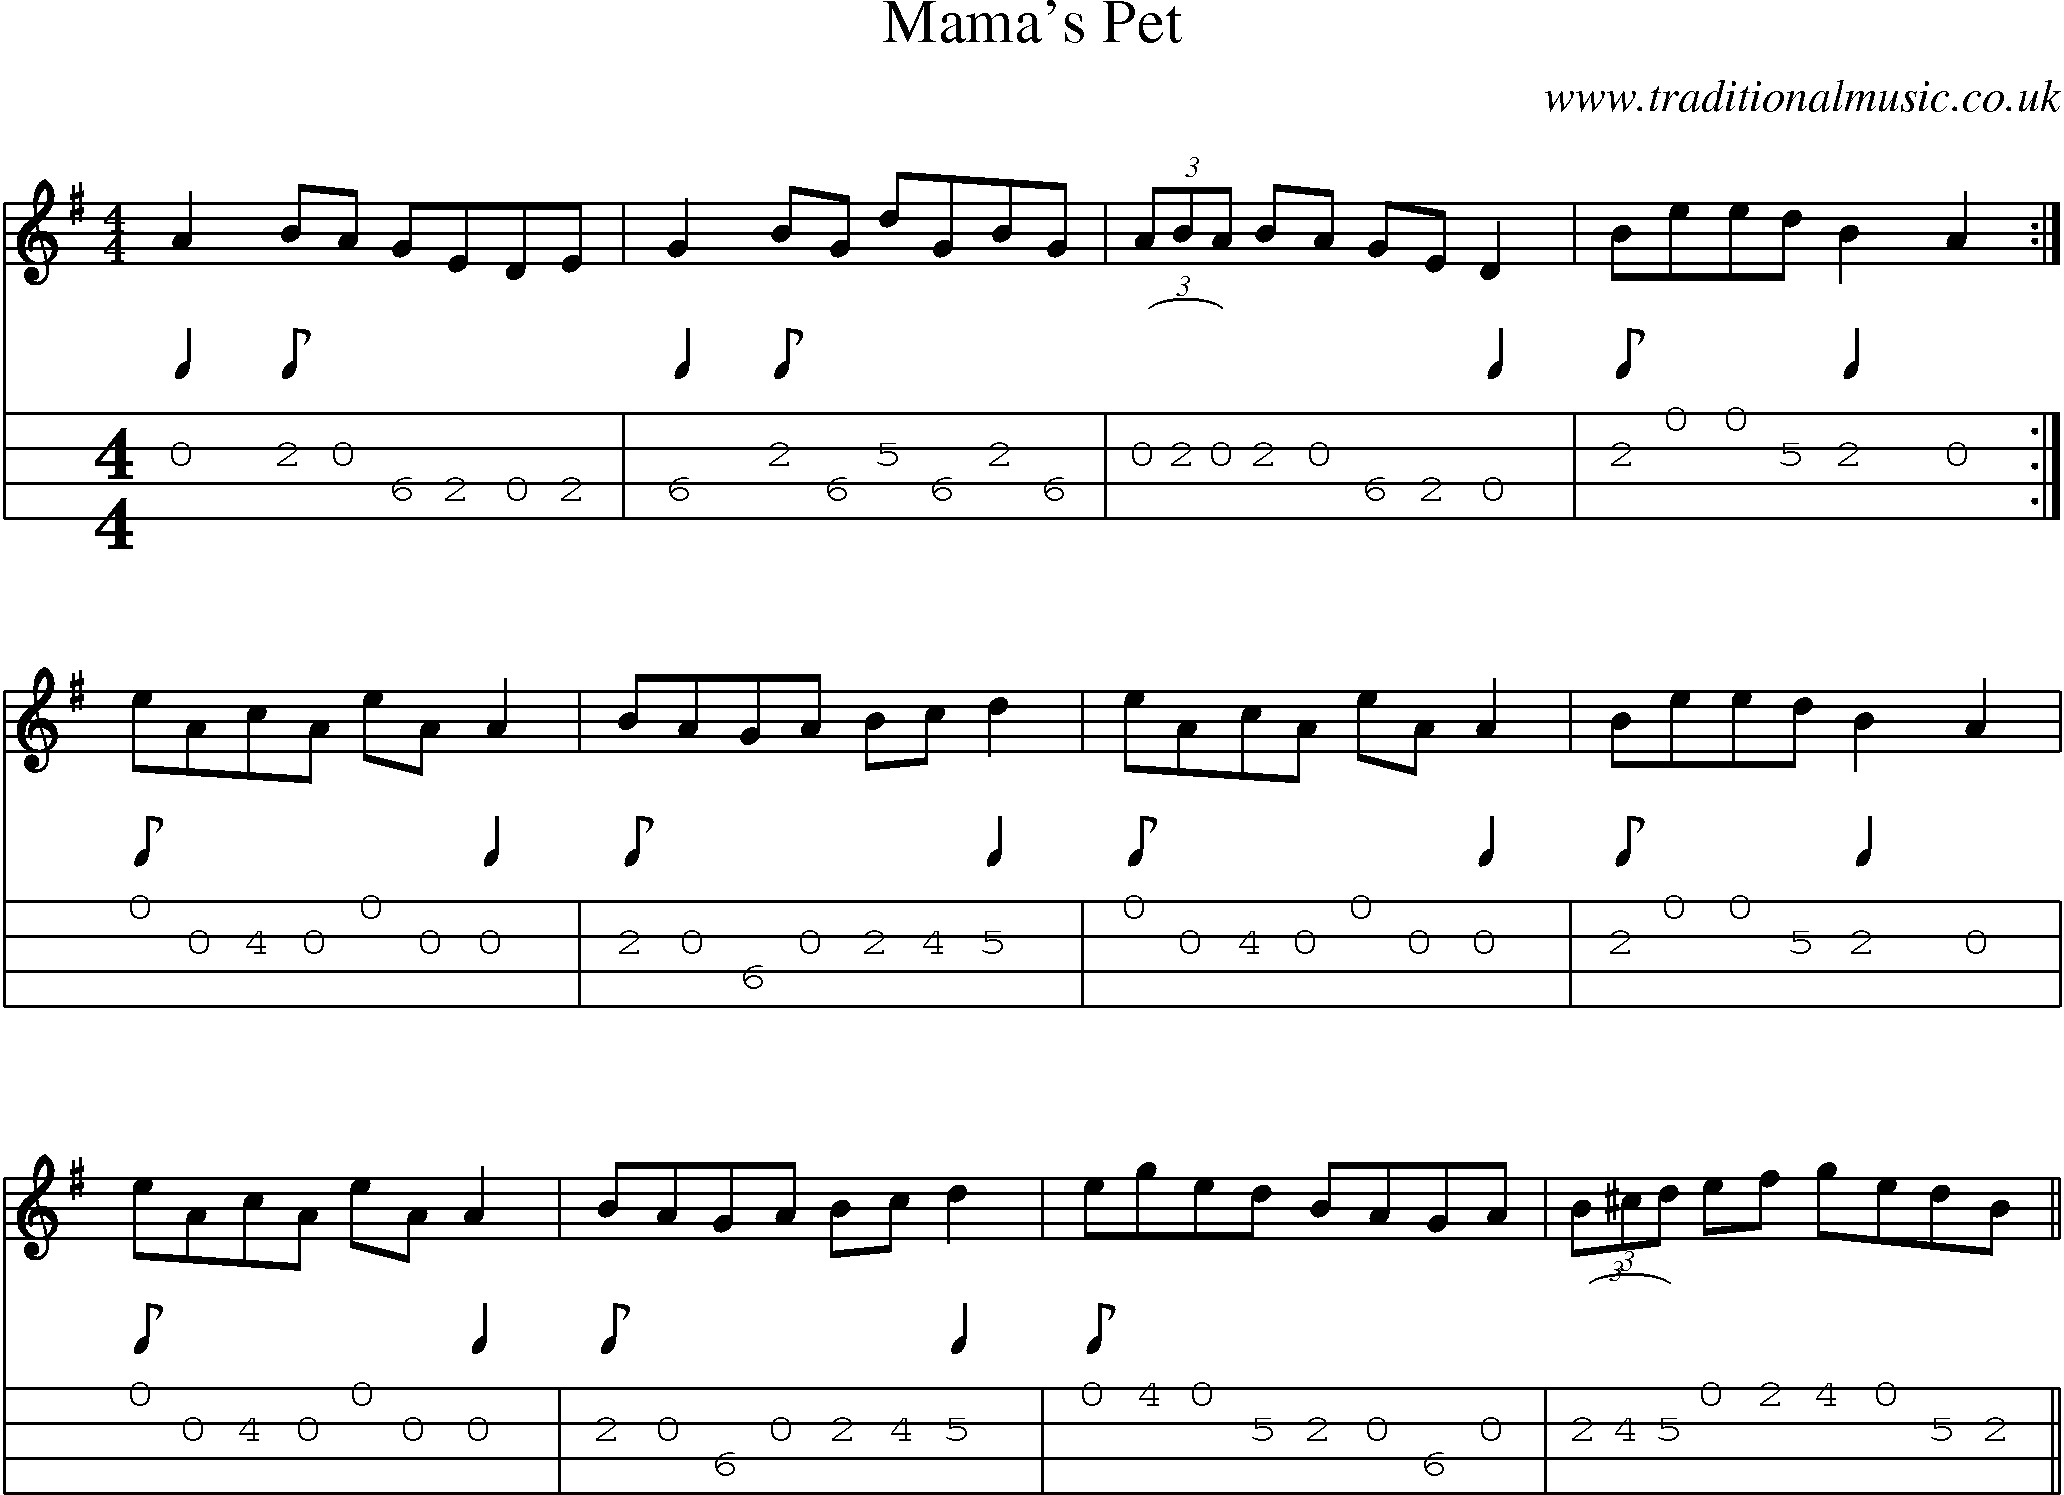 Music Score and Mandolin Tabs for Mamas Pet